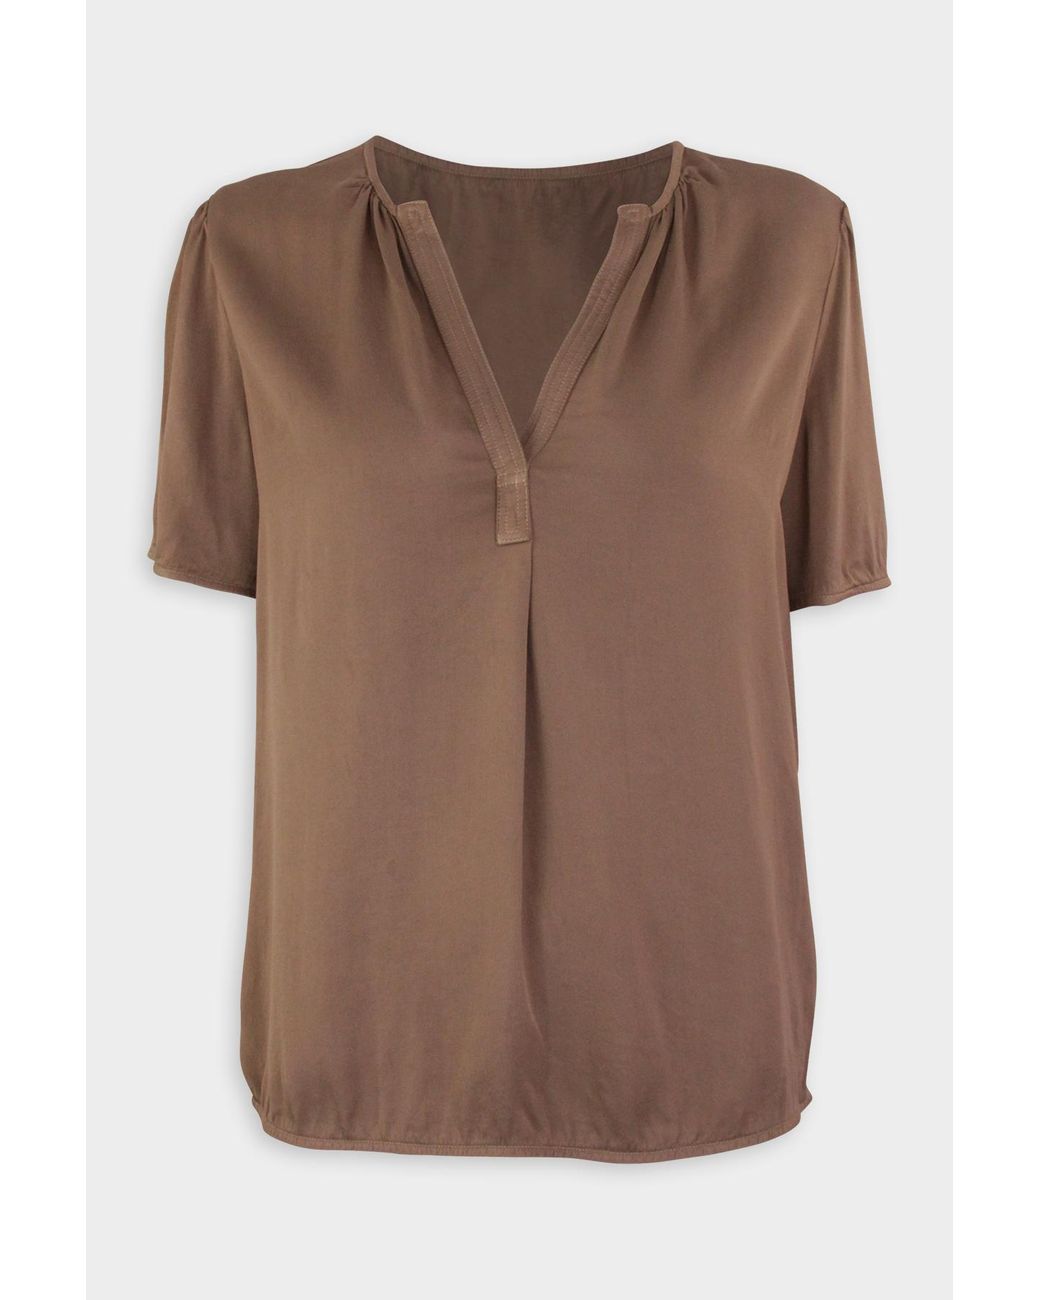 Raquel Allegra Synthetic Lilakoi Blouse In Taupe in Brown - Lyst